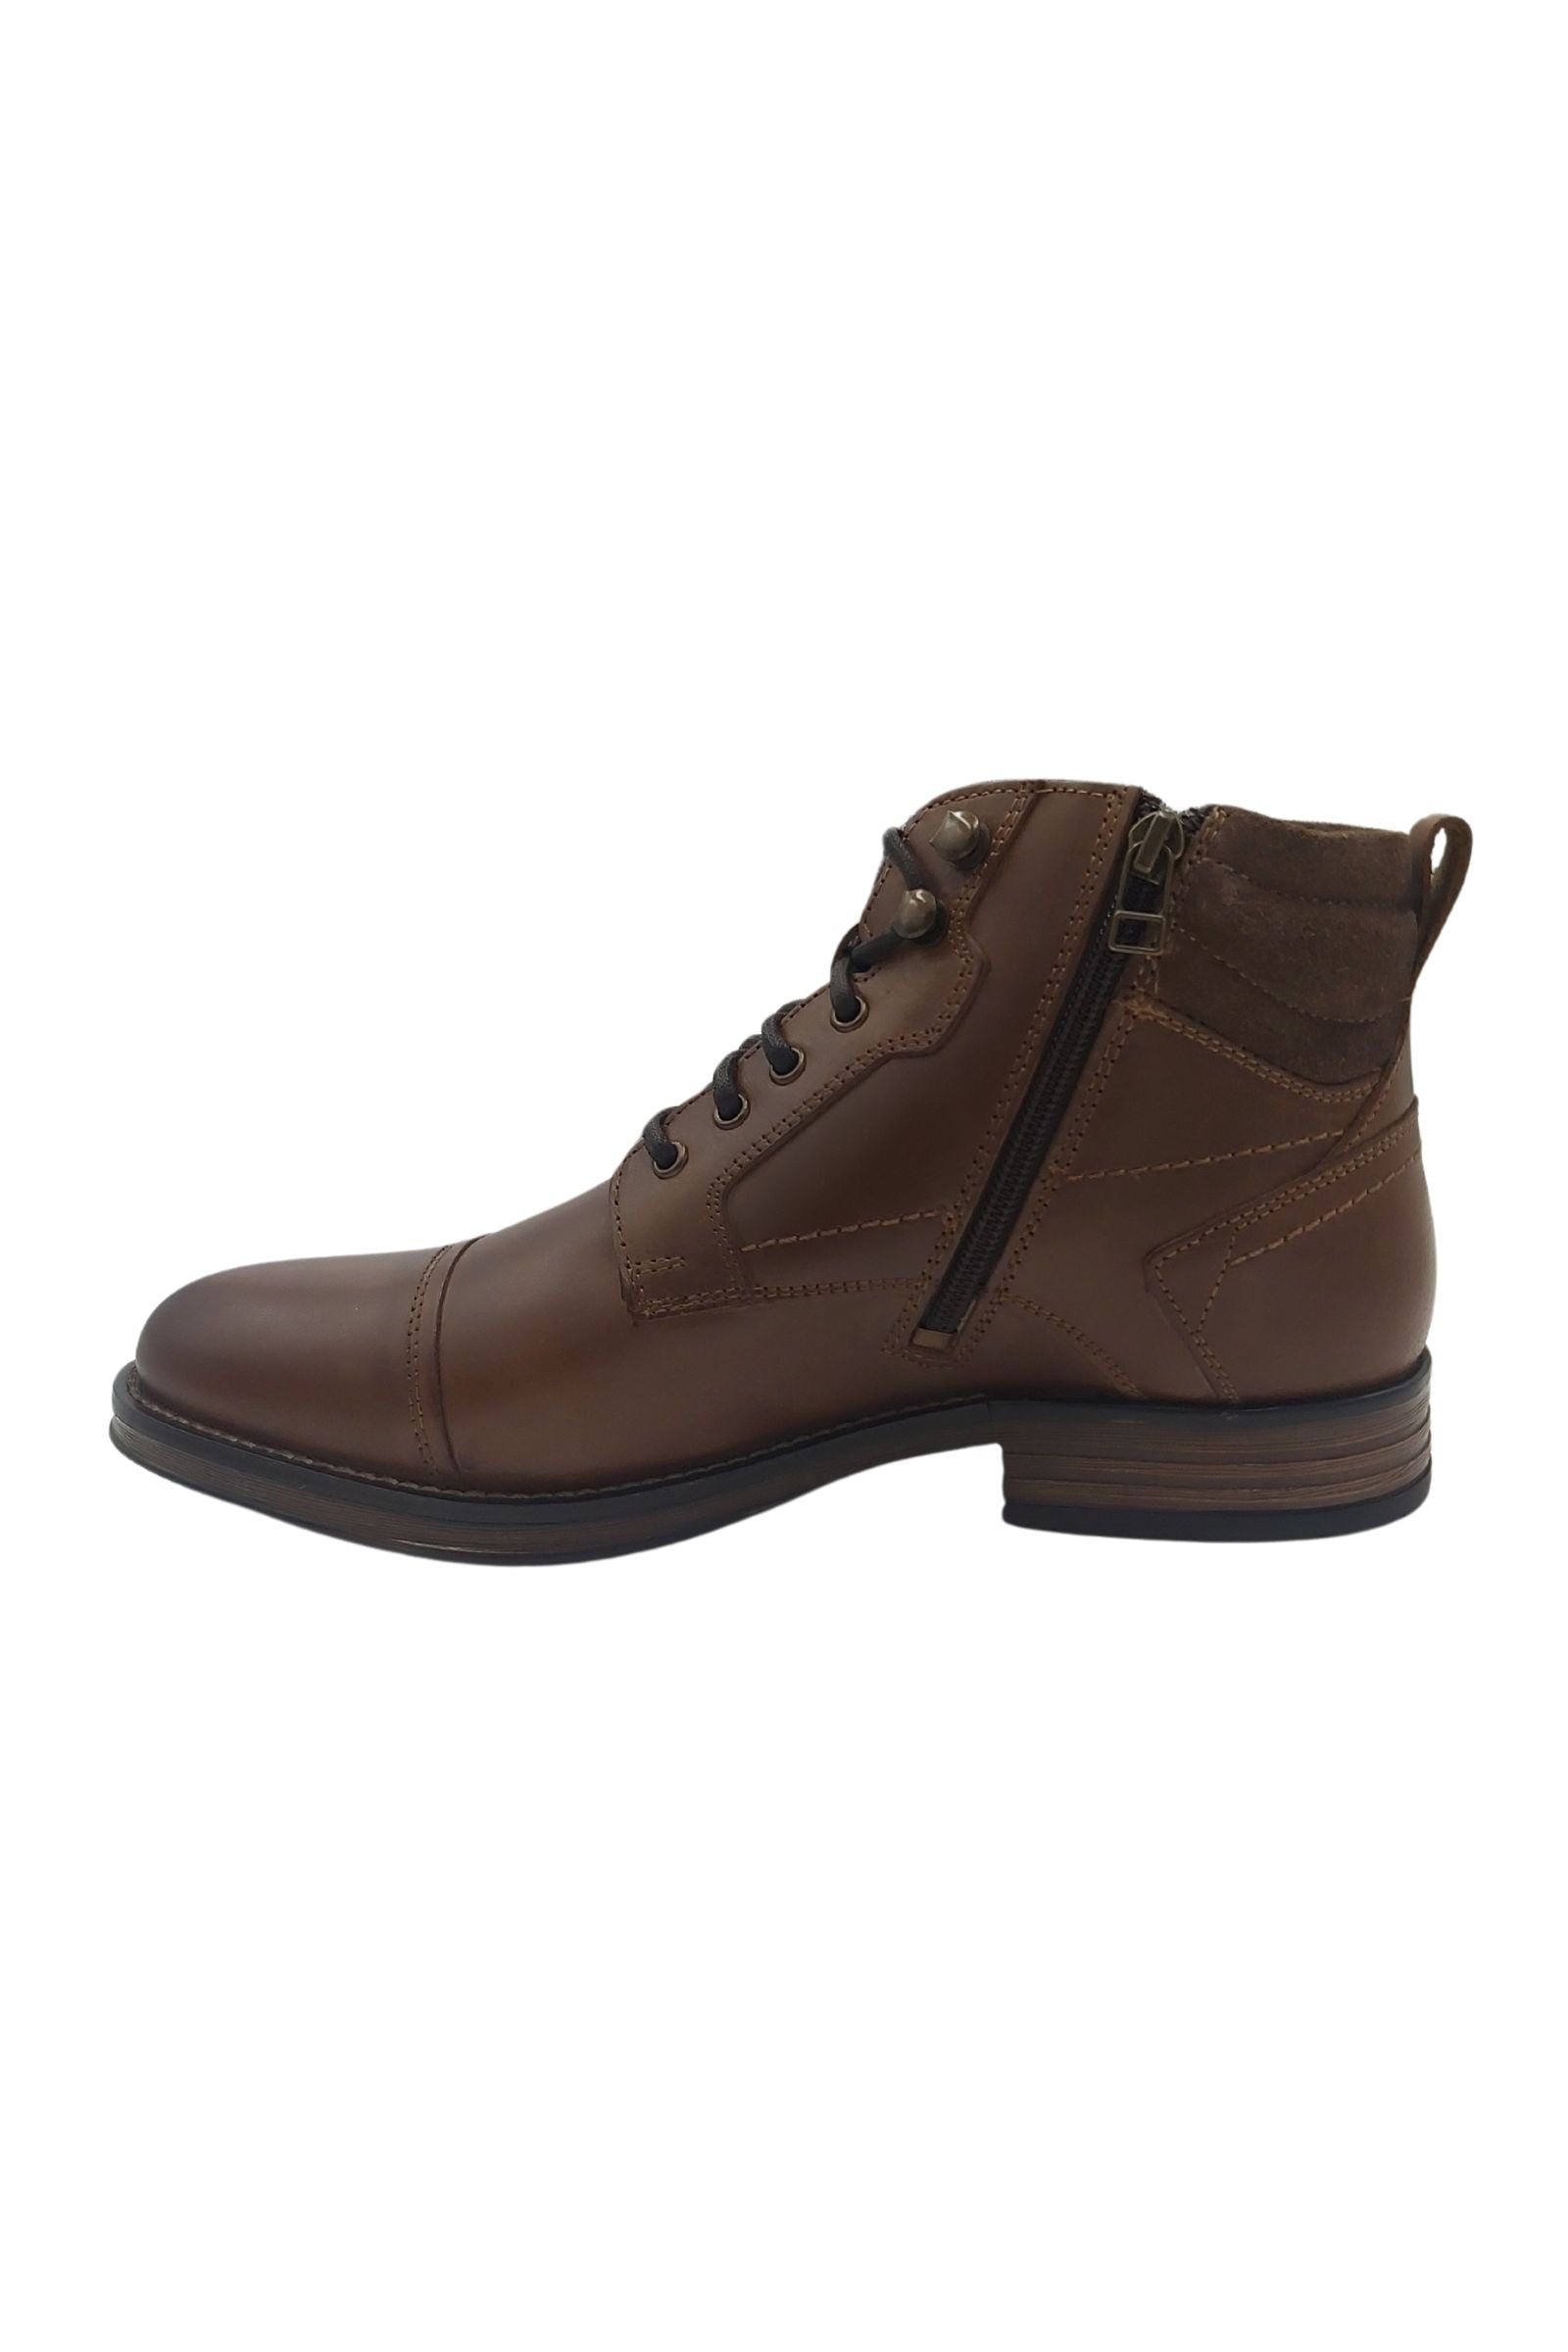 Men's Jackson Brown Boot-Side View 2